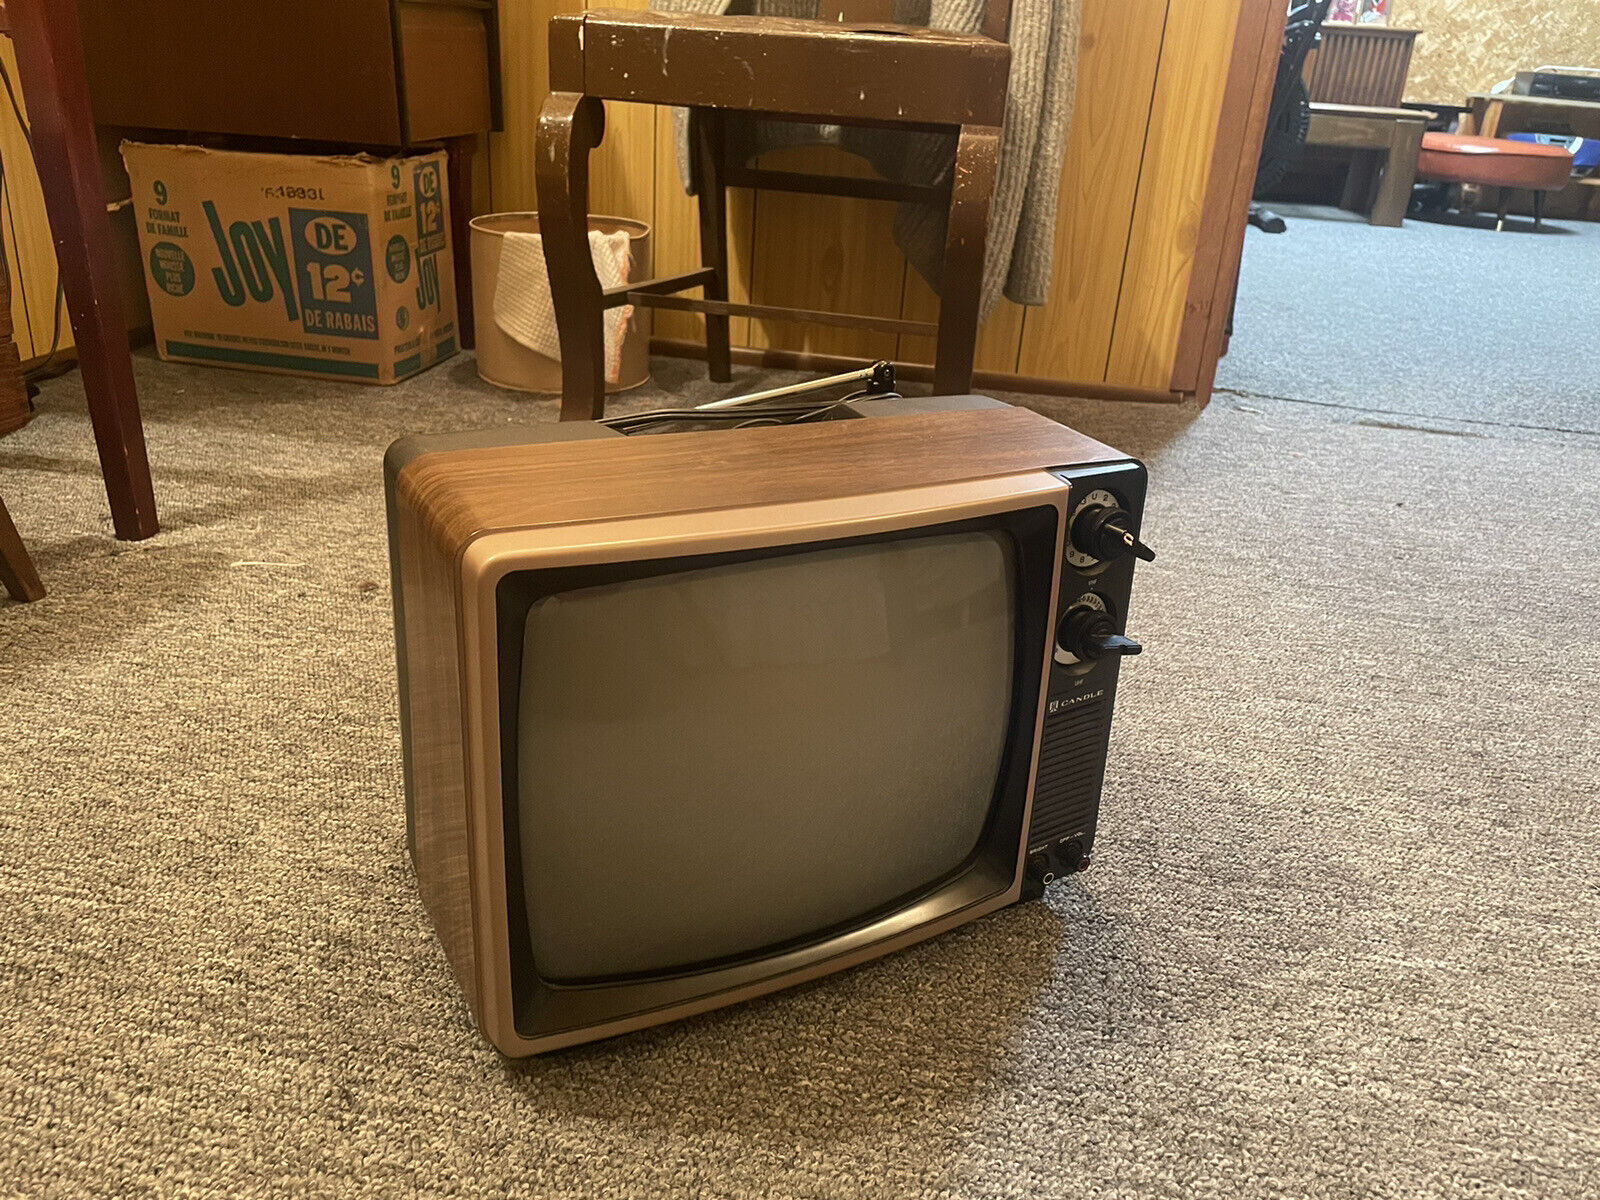 1987 Vintage Wood Grain Candel Television Black And White. Like New Condition